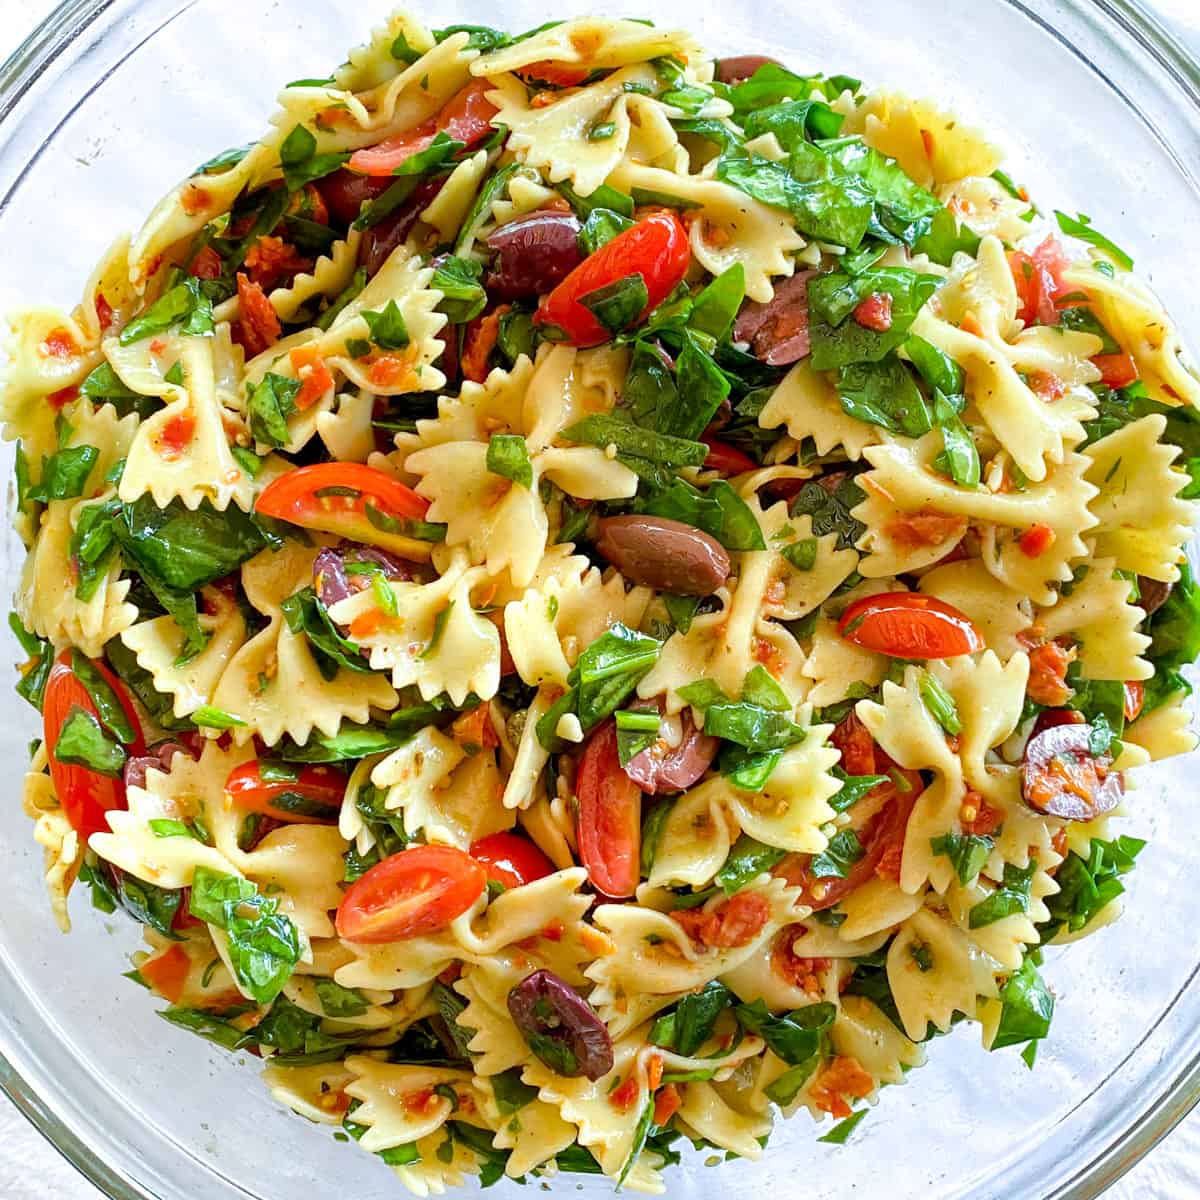 colorful bow tie pasta salad with fresh tomatoes, sun dried tomatoes, kalamata olives, and chopped spinach